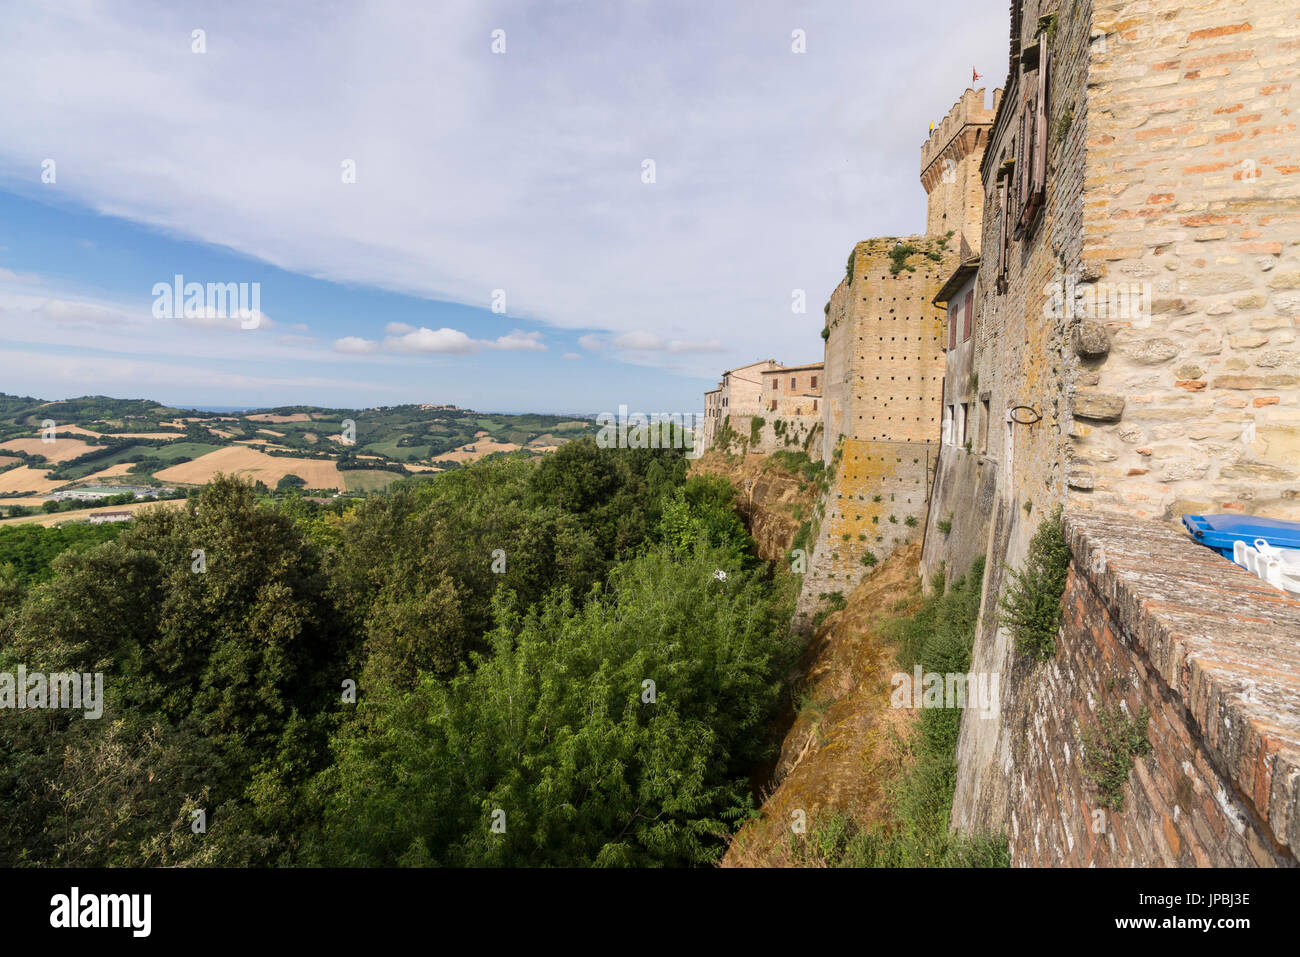 The castle and fortress of the medieval village perched on the hill Offagna Province of Ancona Marche italy Europe Stock Photo